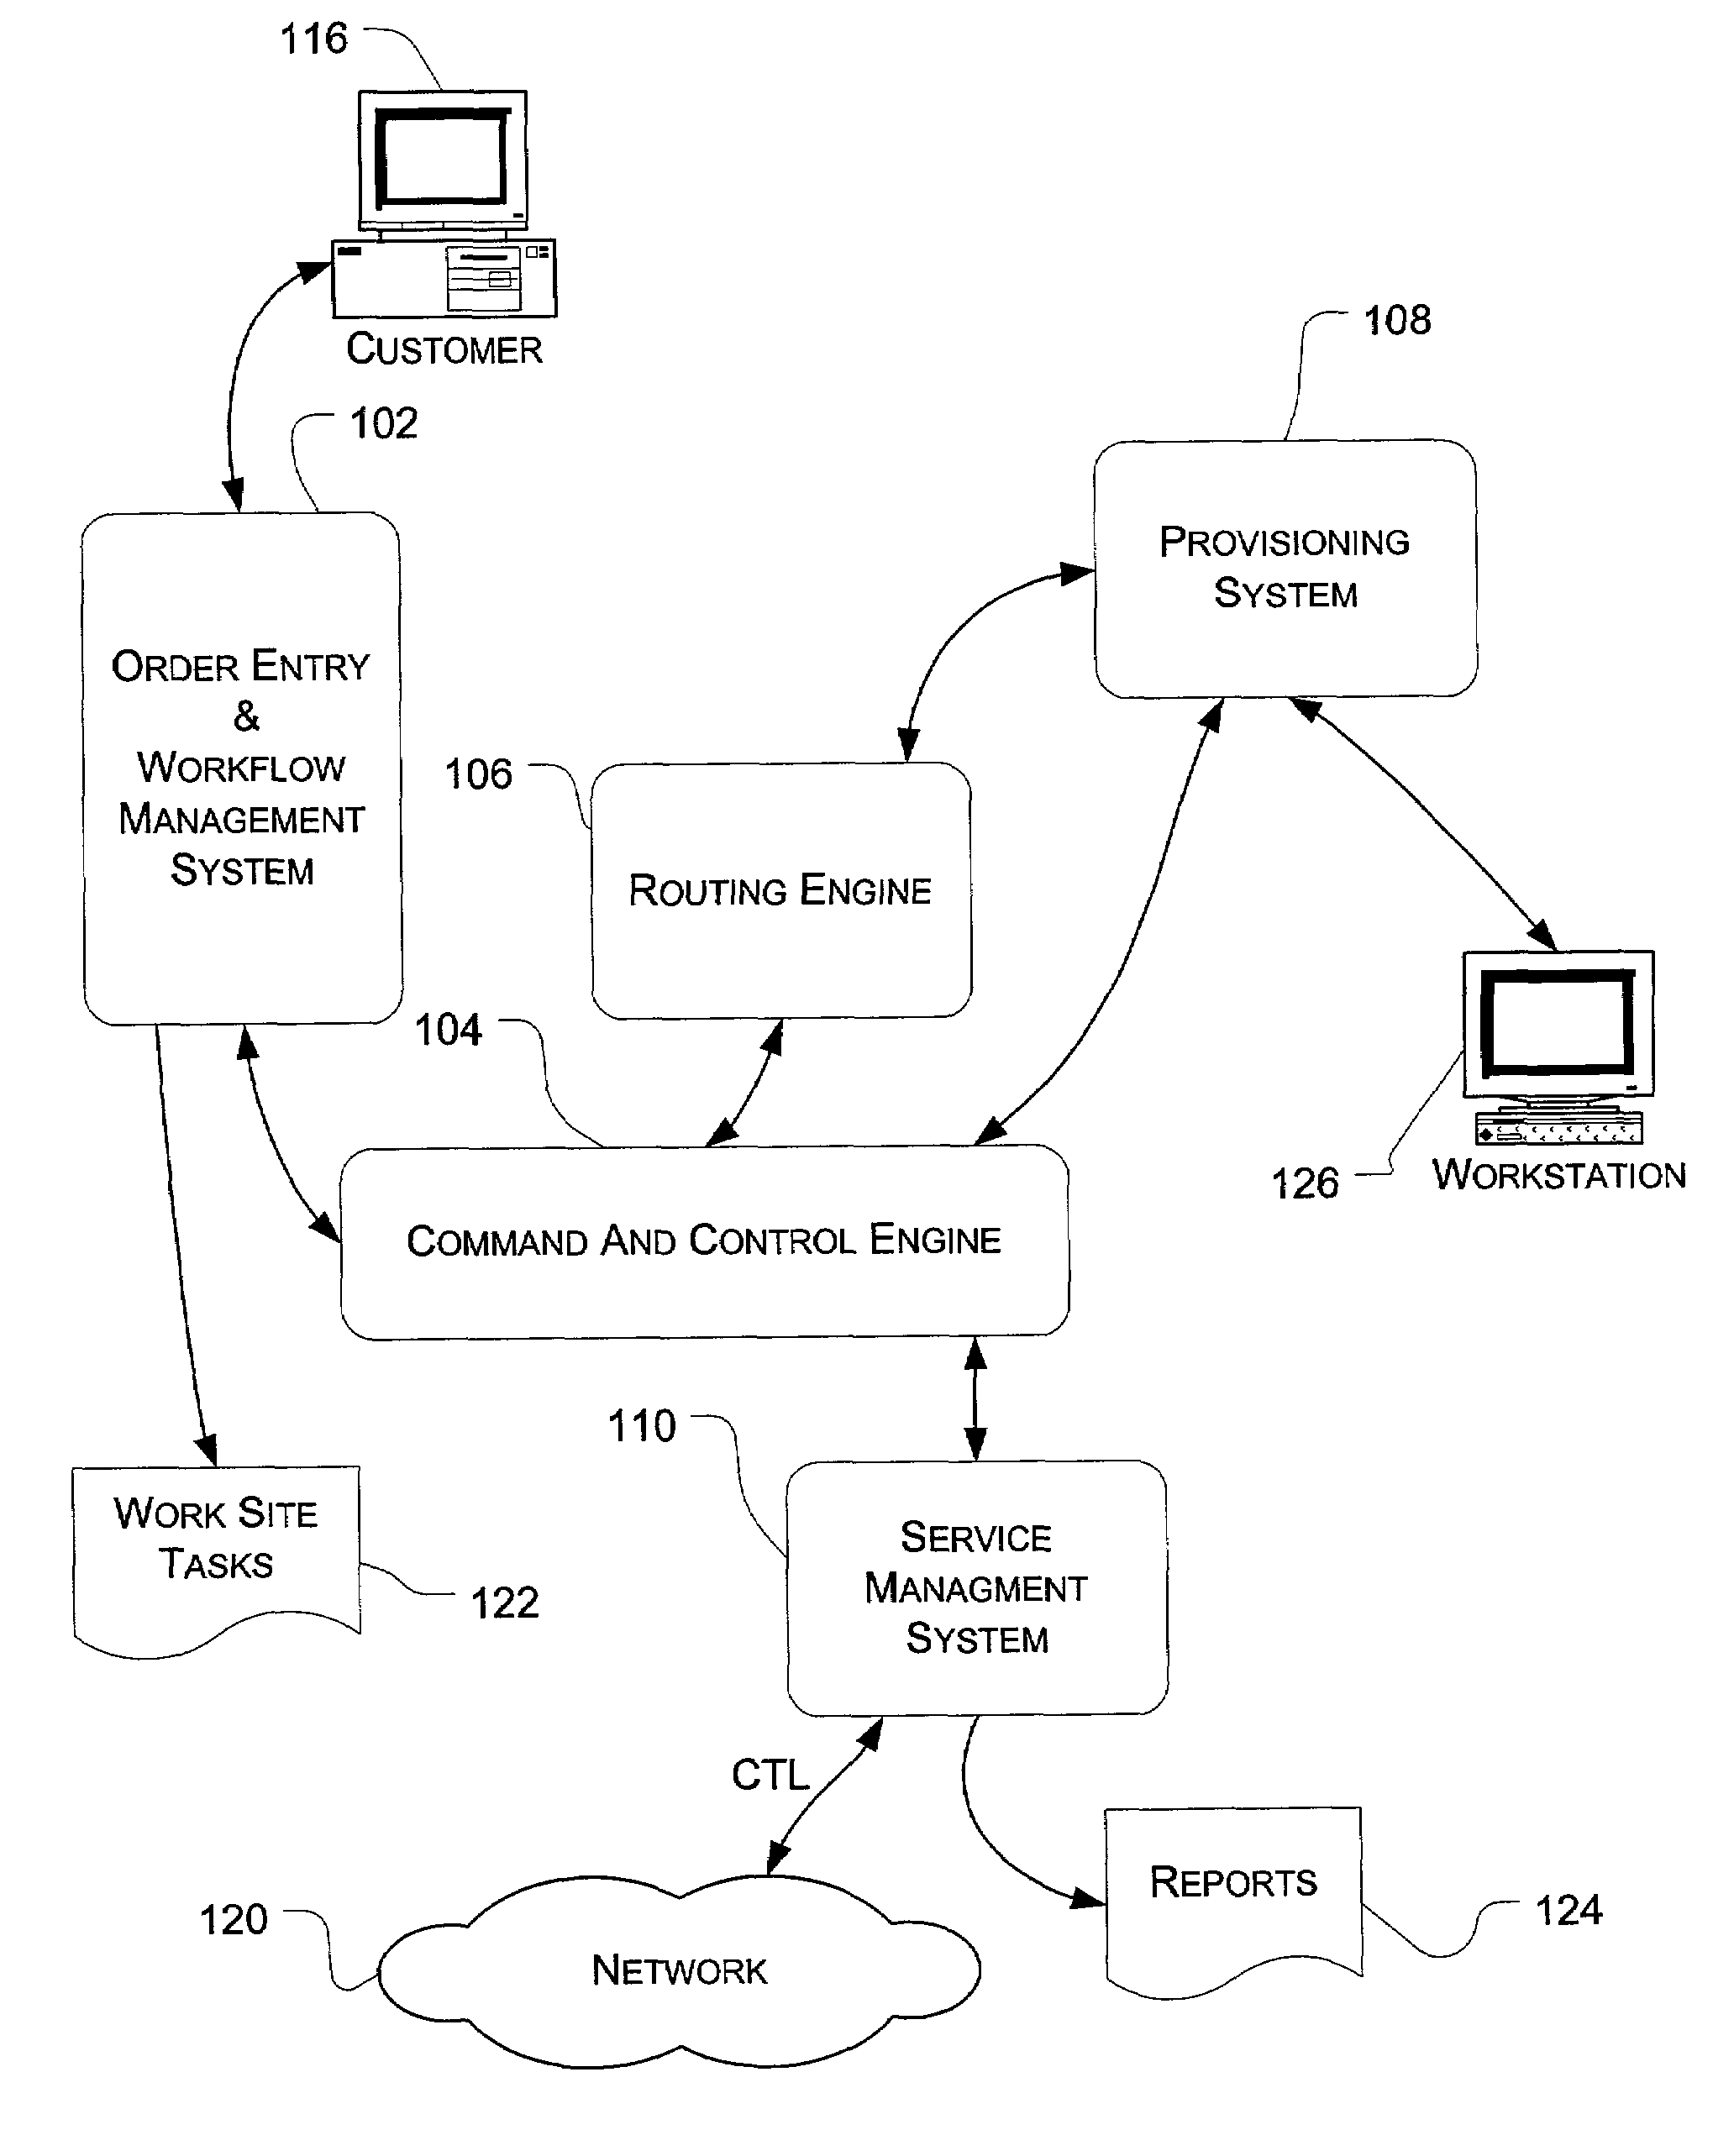 Routing engine for telecommunications network